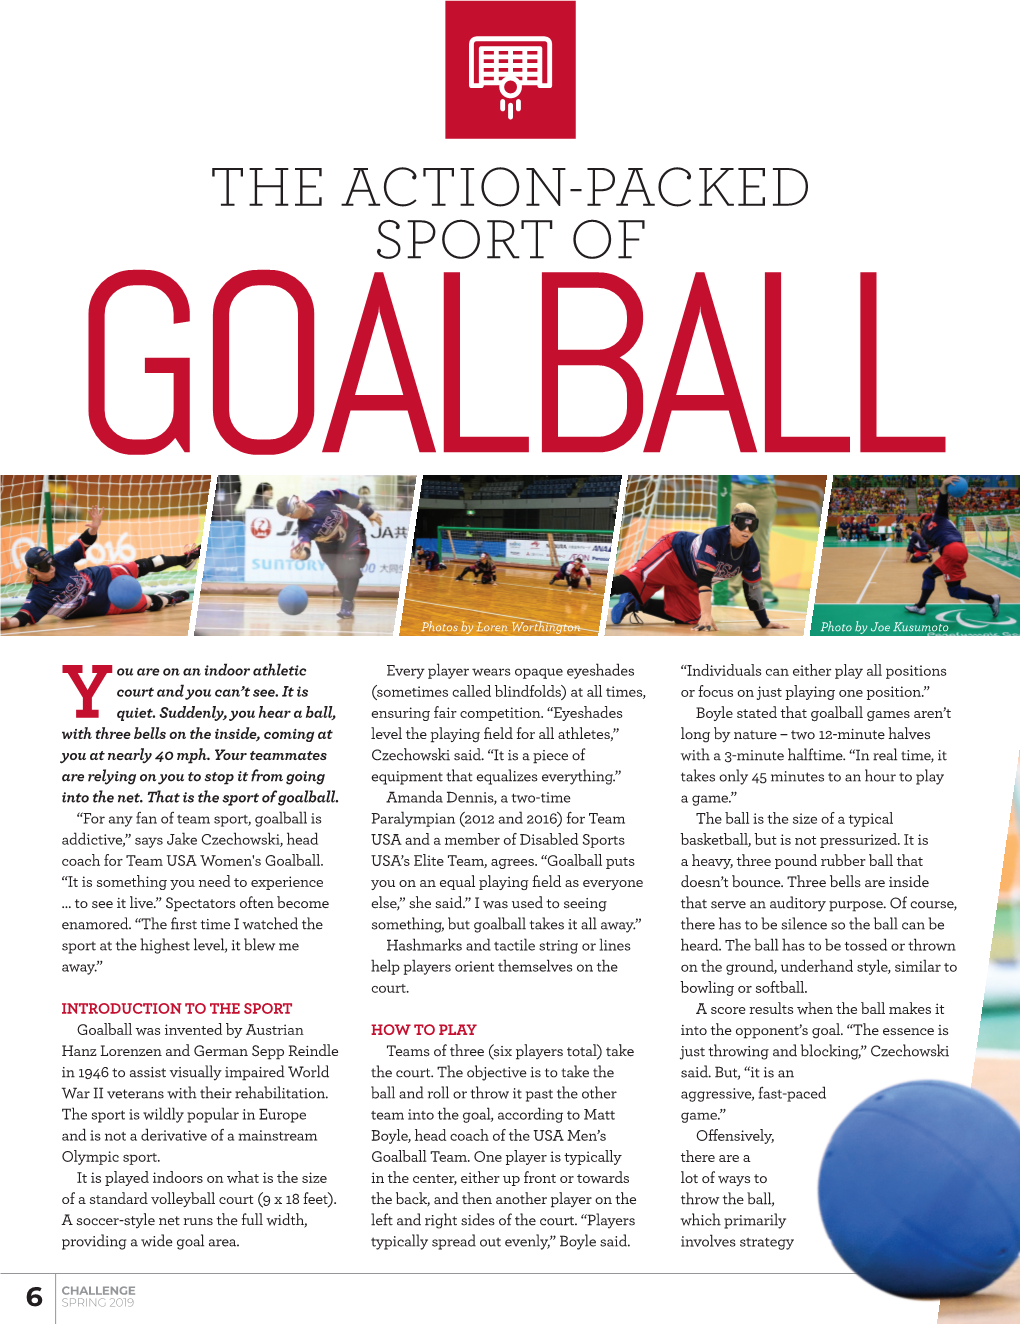 The Action-Packed Sport of Goalball